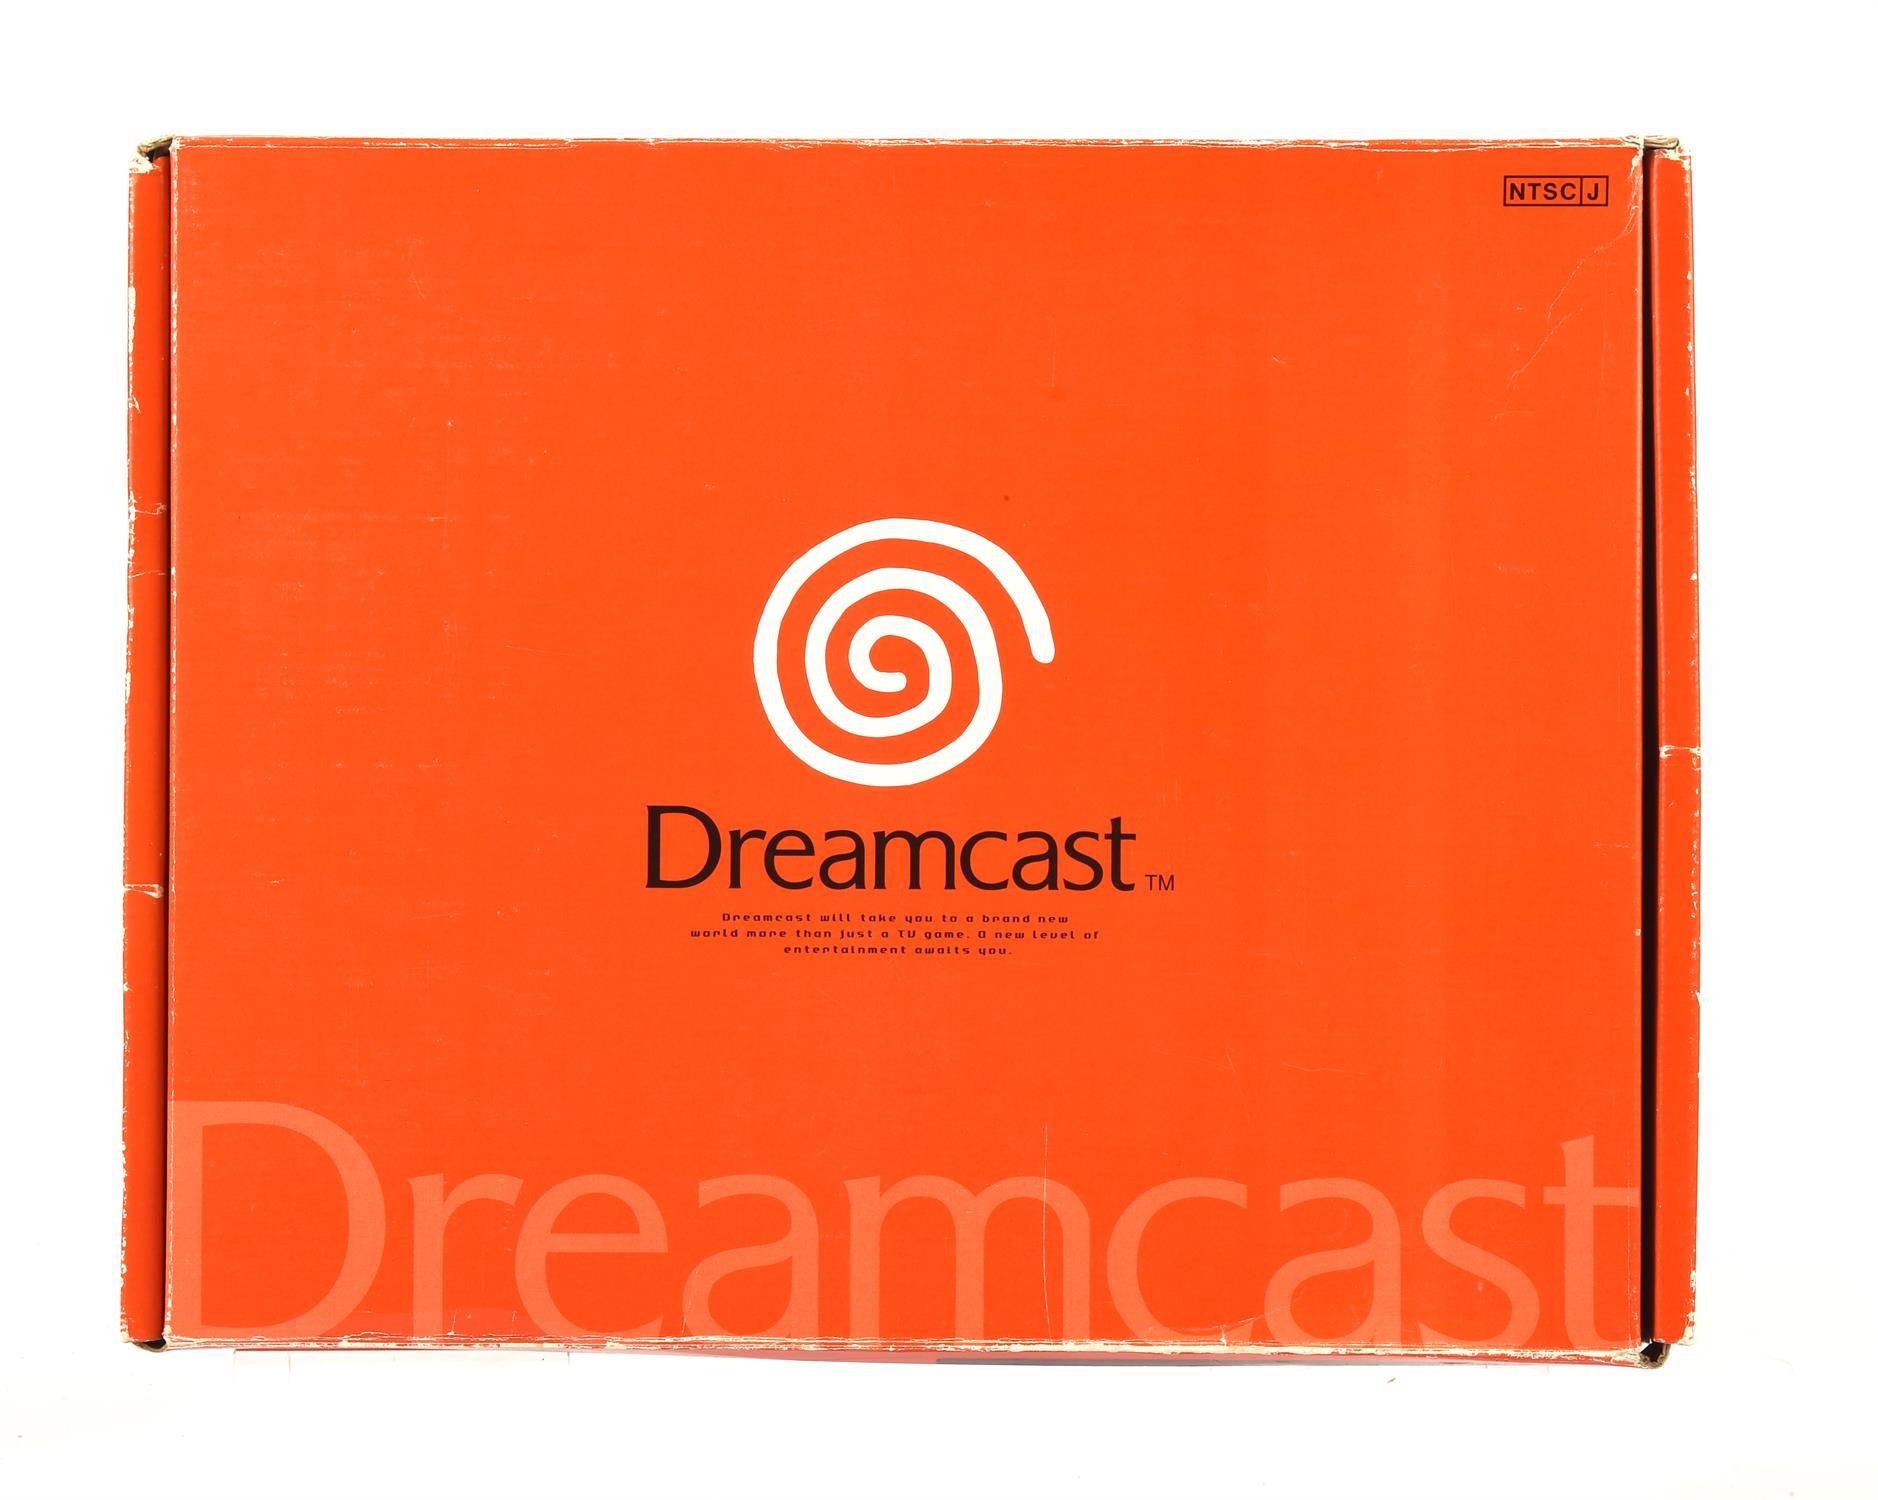 Japanese Sega Dreamcast console, complete and boxed (NTSC-J) Console comes with 1 controller, - Image 2 of 4